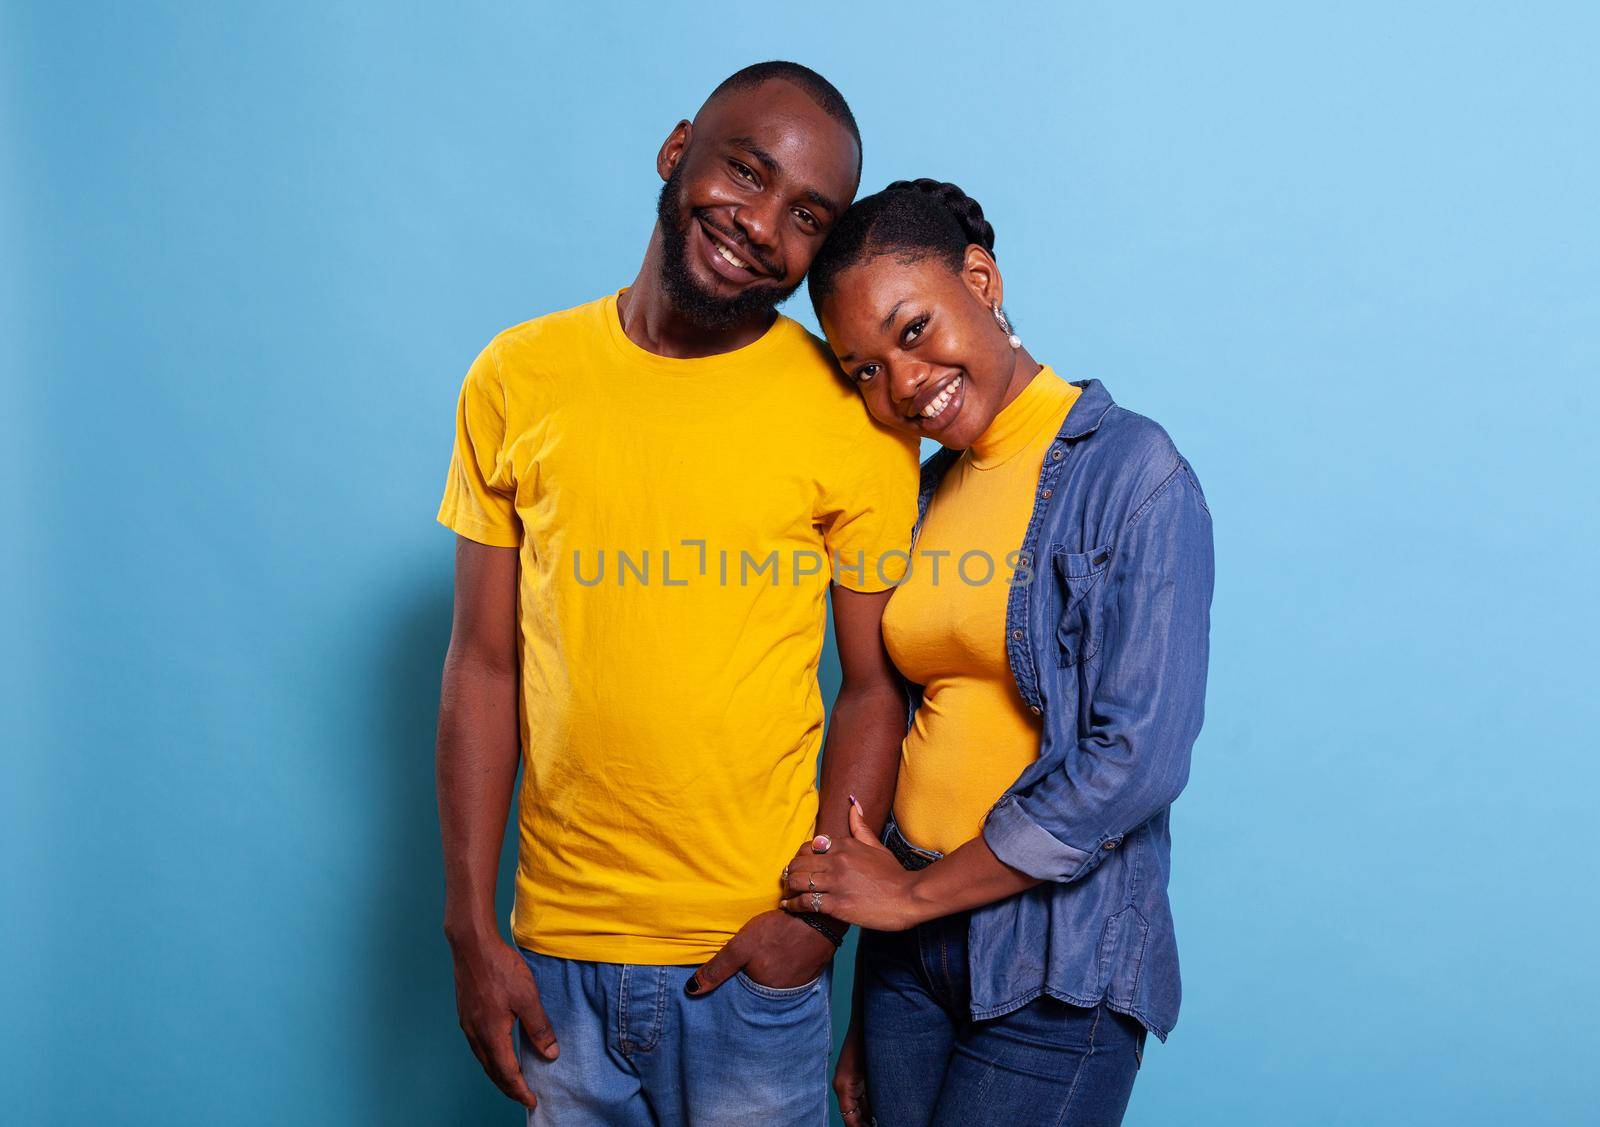 Portrait of young couple holding hands over blue background, showing love and gratitute for each other. Girlfriend and boyfriend expressing fondness and smiling, feeling happy in relationship.